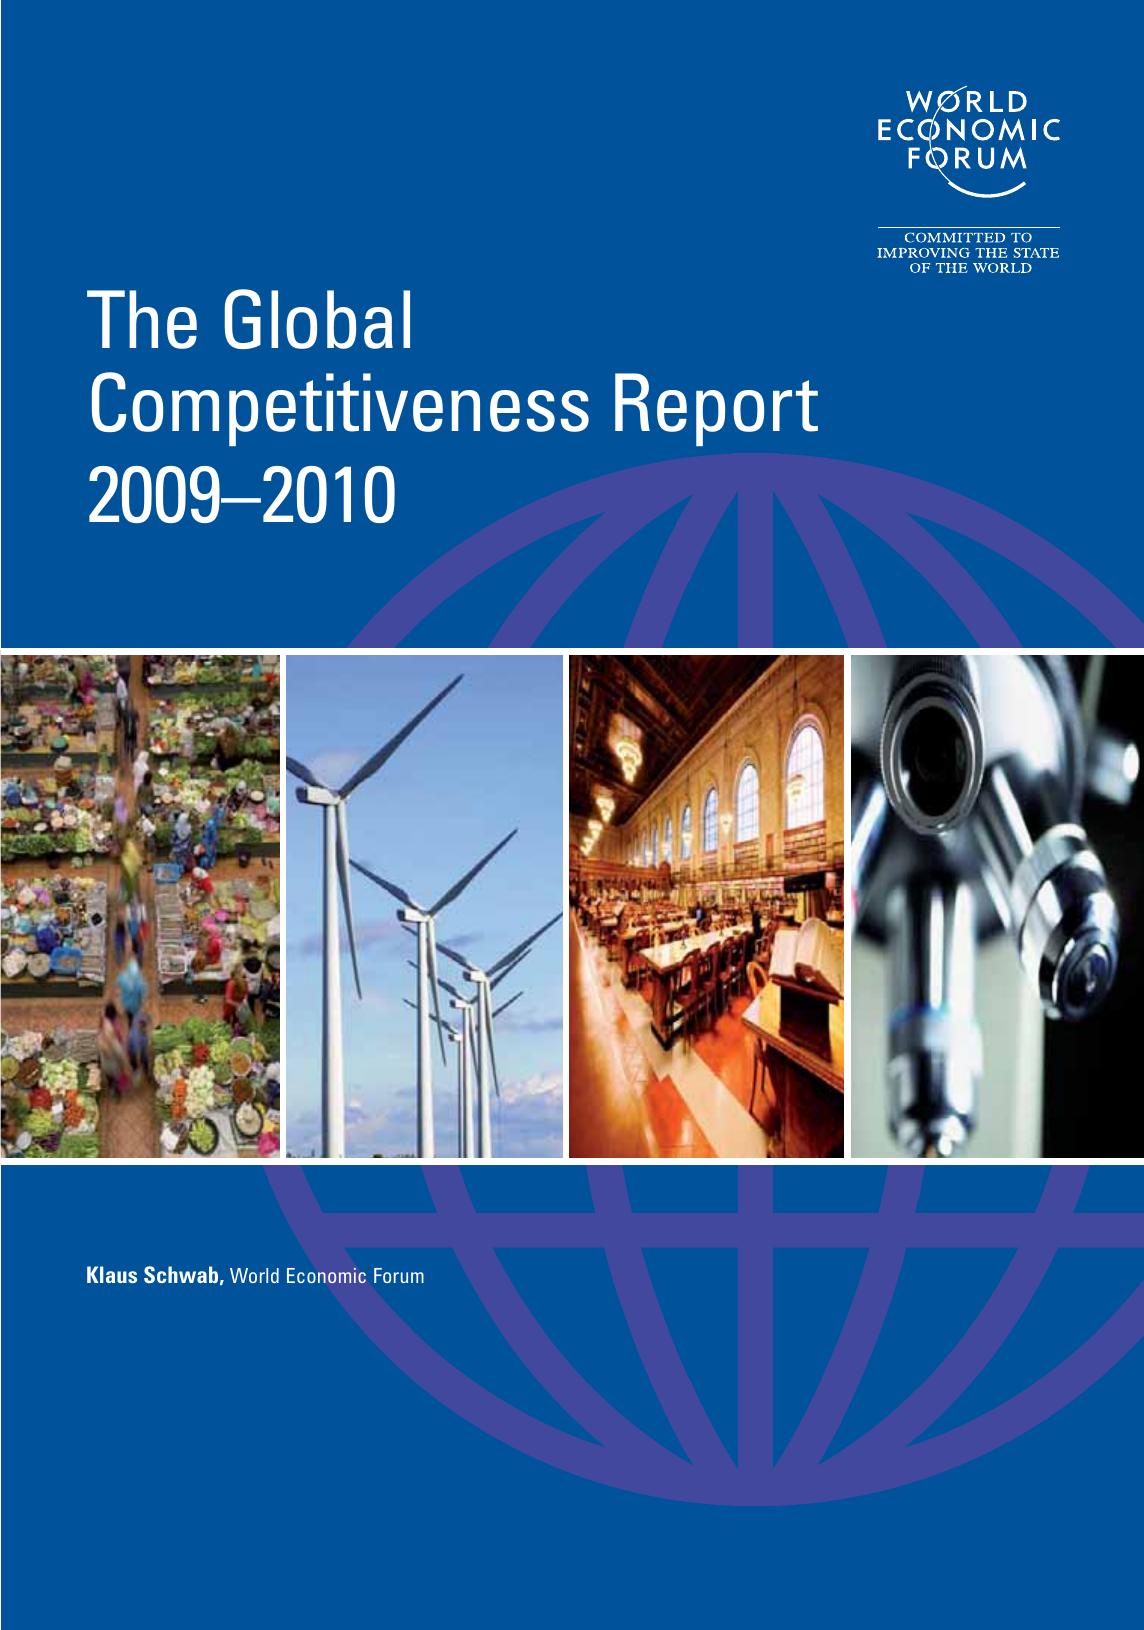 The Global Competitiveness Report 2009-2010